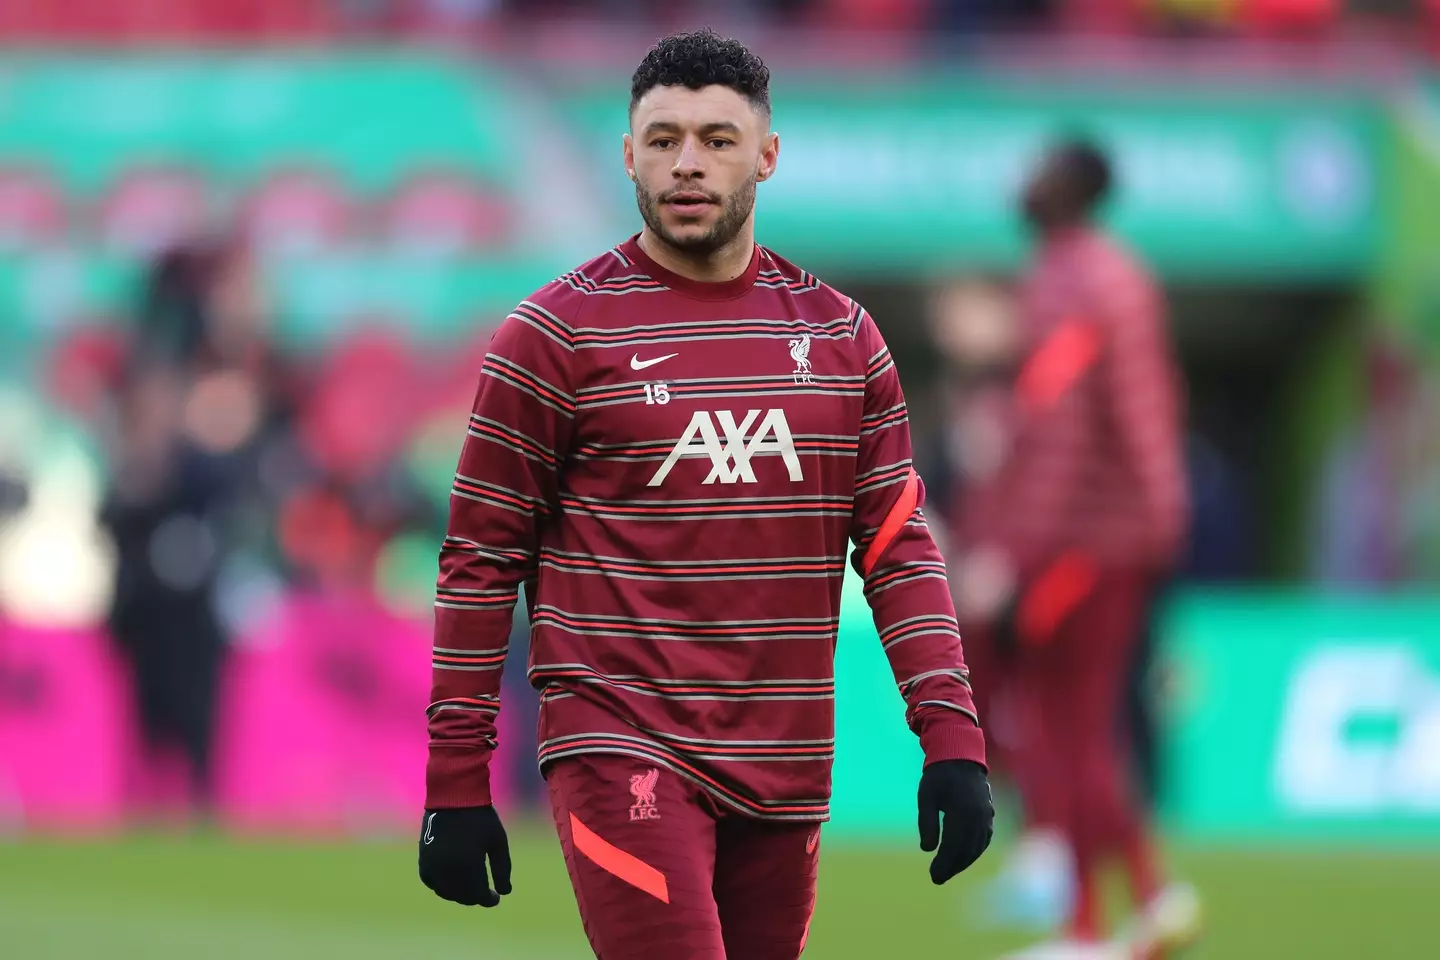 Alex Oxlade-Chamberlain has been plagued with injury. Image